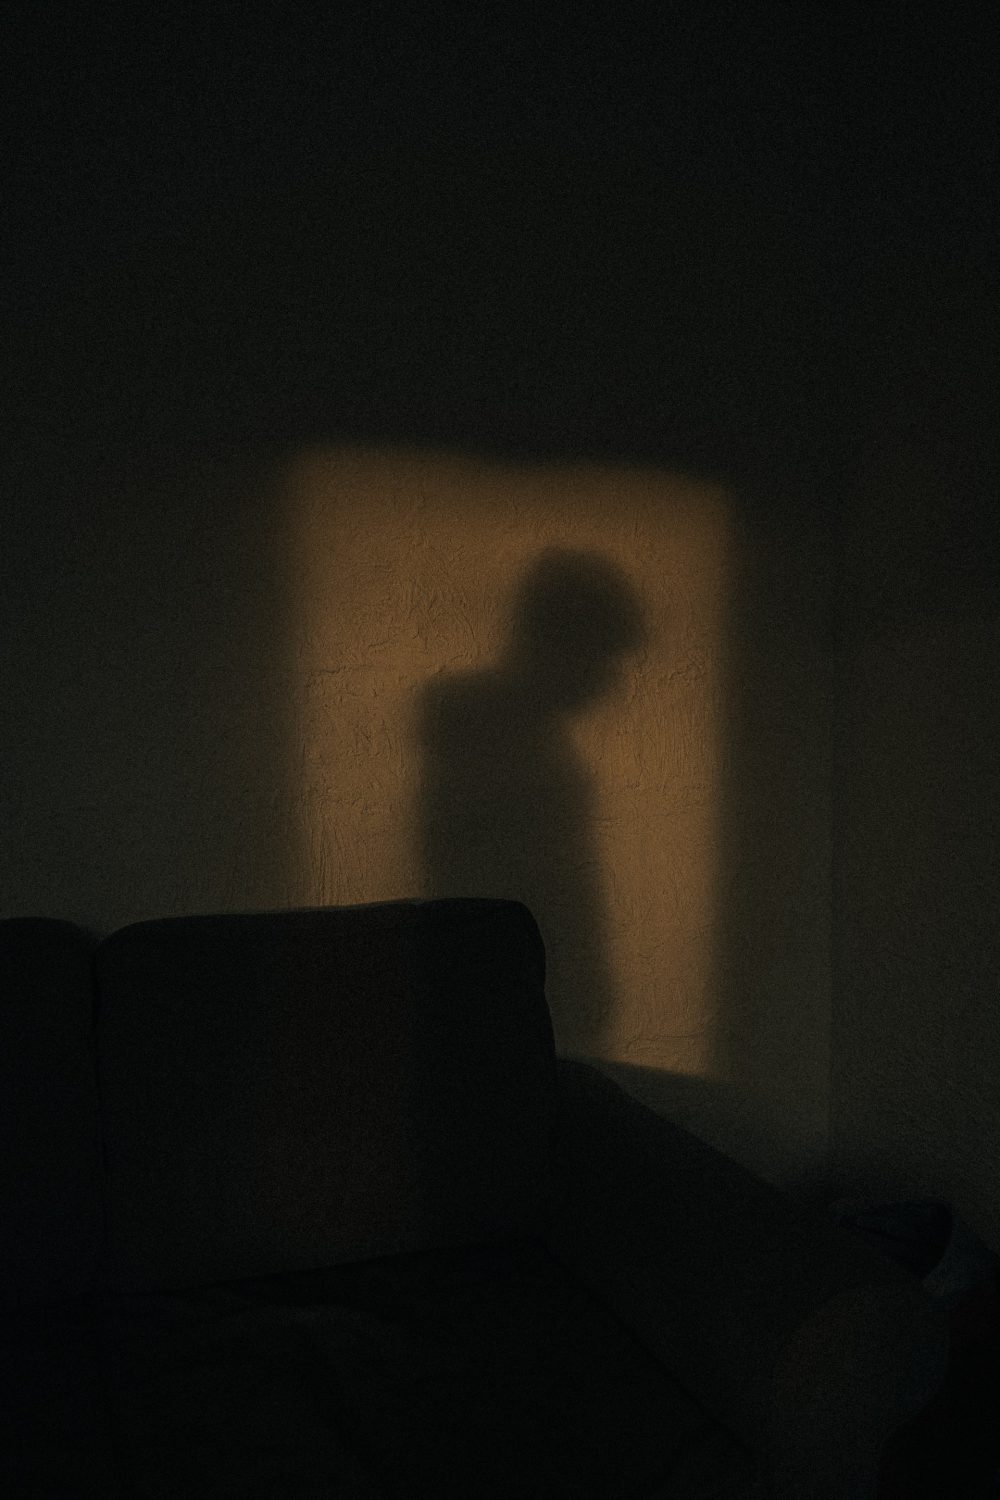 A shadow of a young individual